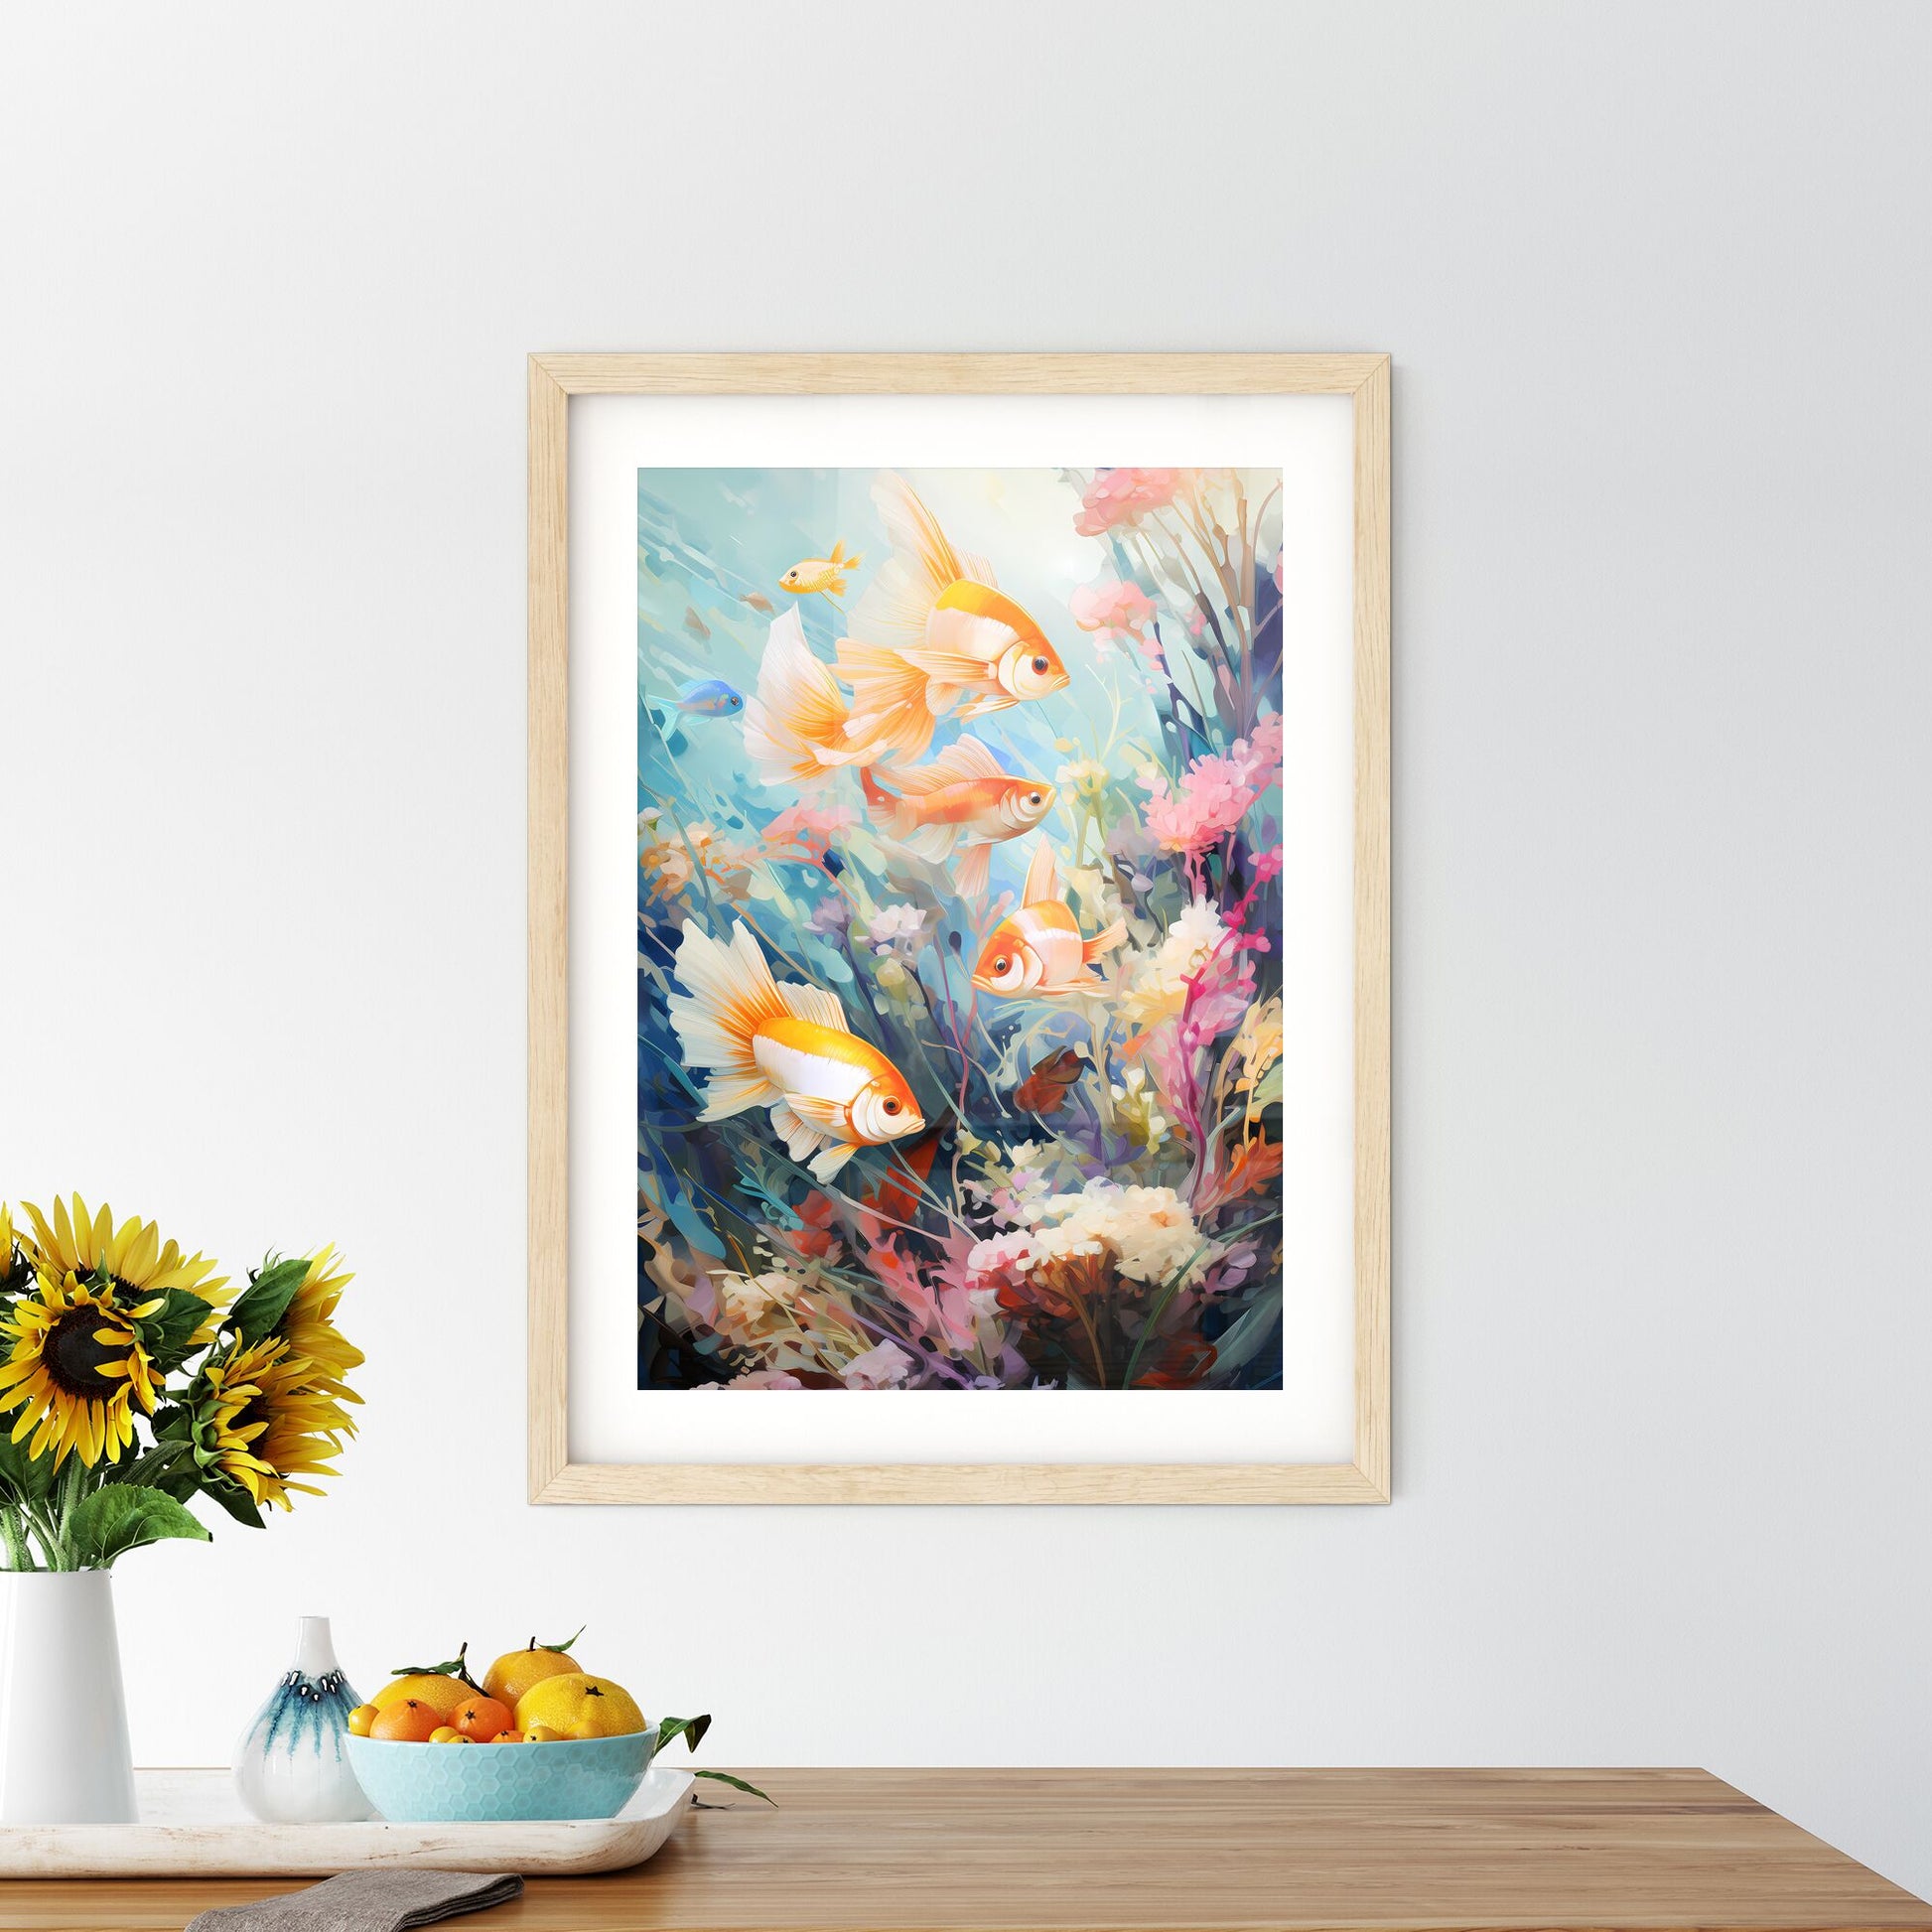 Underwater Aquatic Life With Fishes - A Group Of Goldfish Swimming In Water Default Title